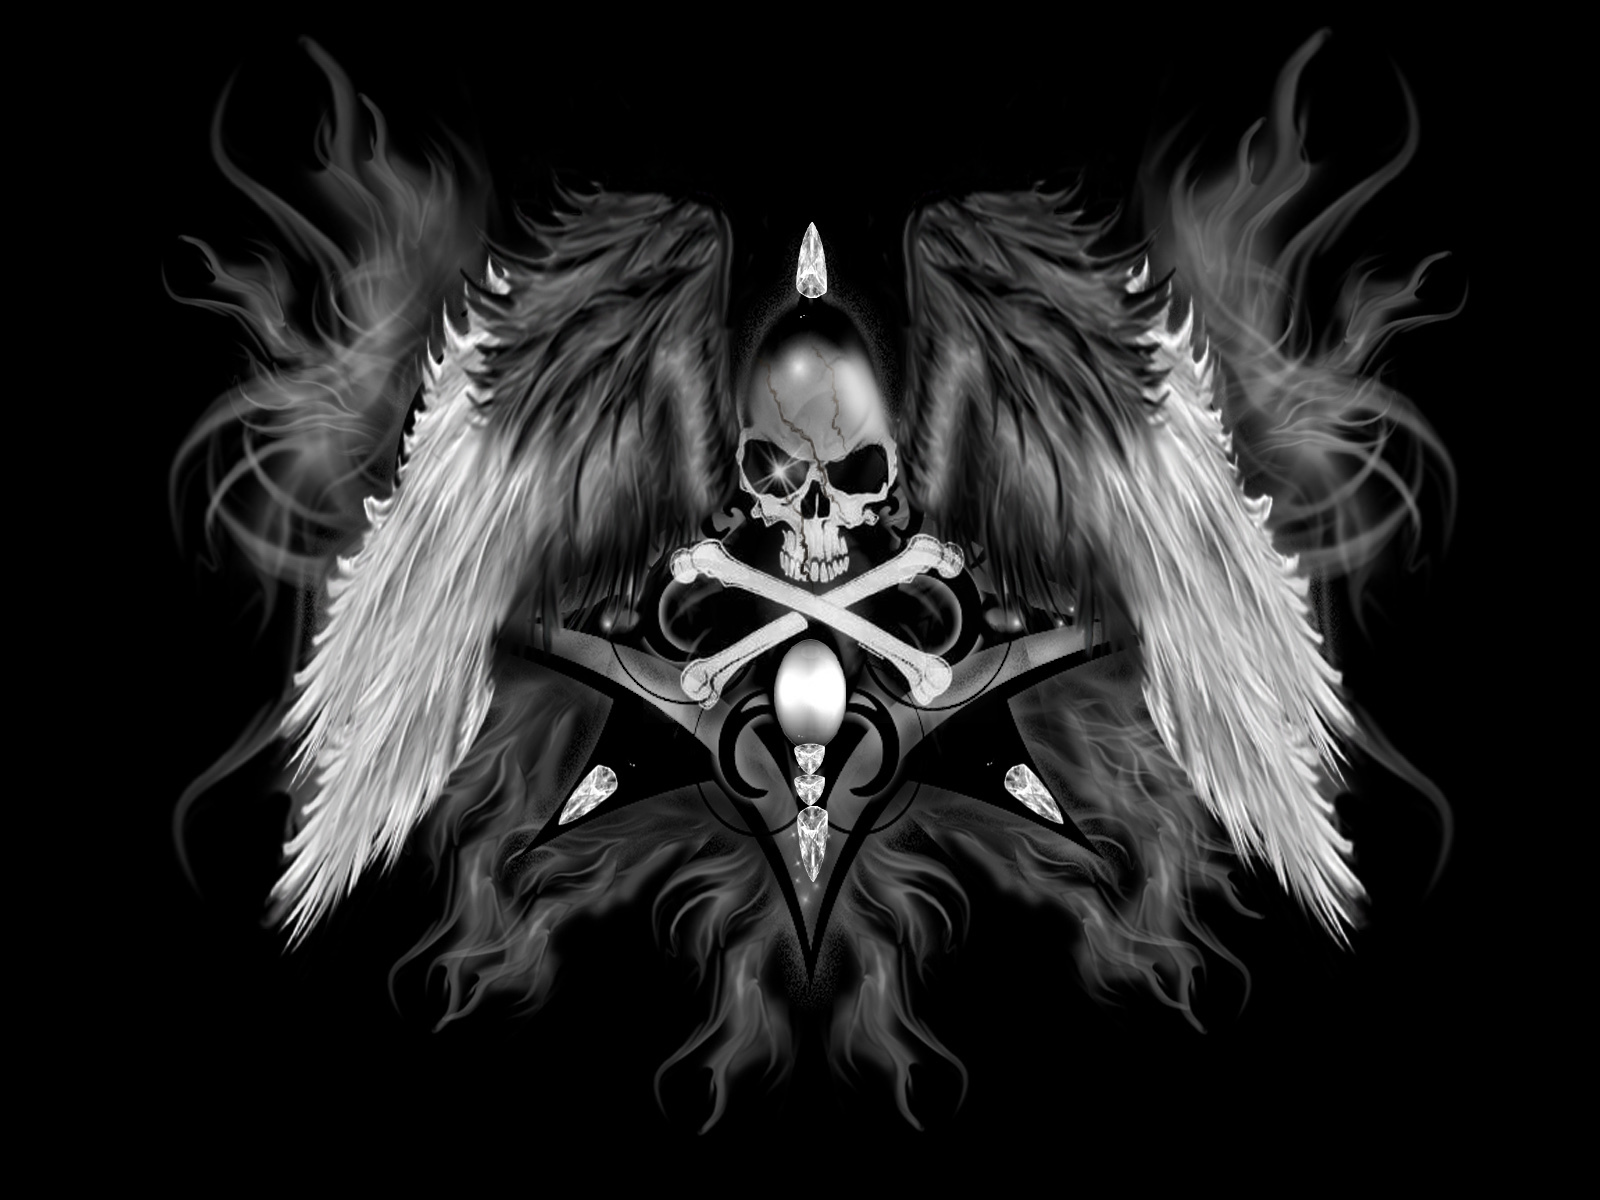 13325 download wallpaper death, art, angels, pictures, black screensavers and pictures for free